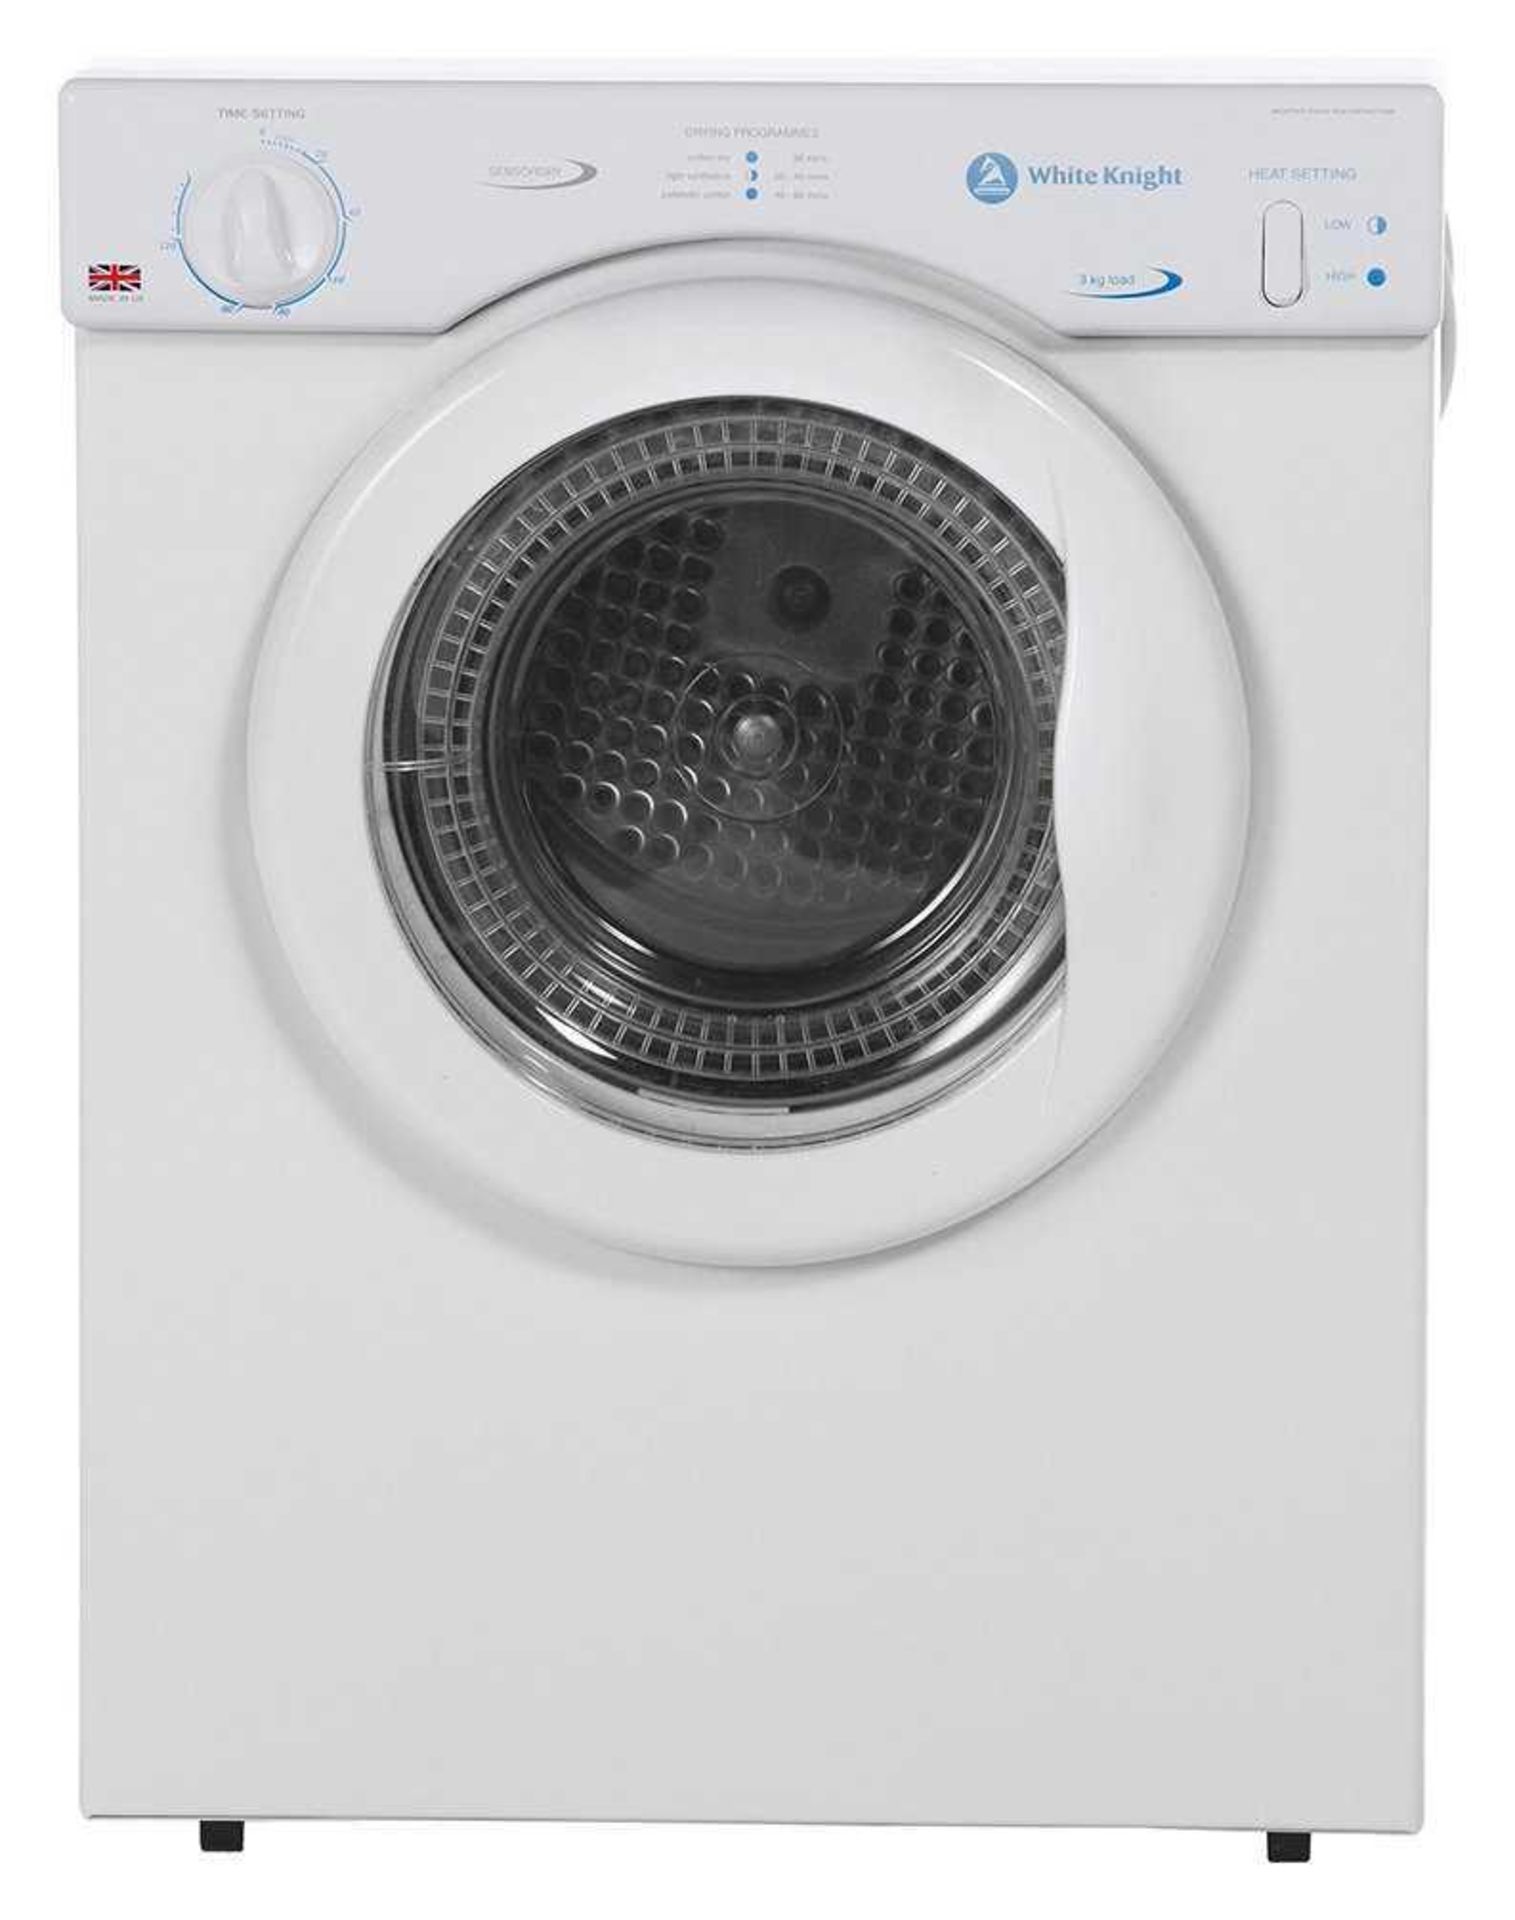 Boxed Grade B White Knight 3Kg Unidirectional Compact Tumble Dryer Rrp £180